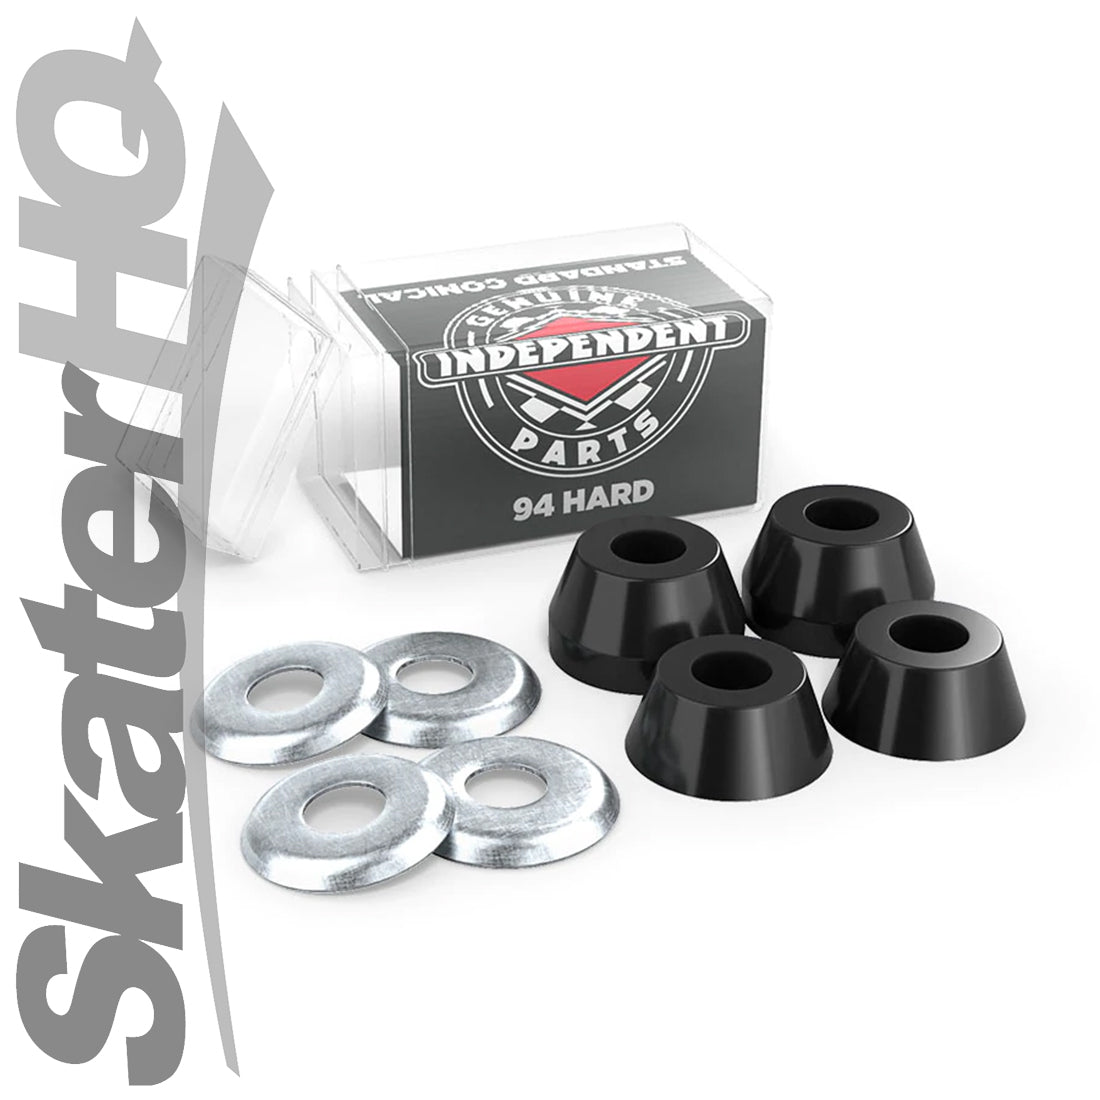 Independent STD/Conical 94a Hard Cushions - Black Skateboard Hardware and Parts